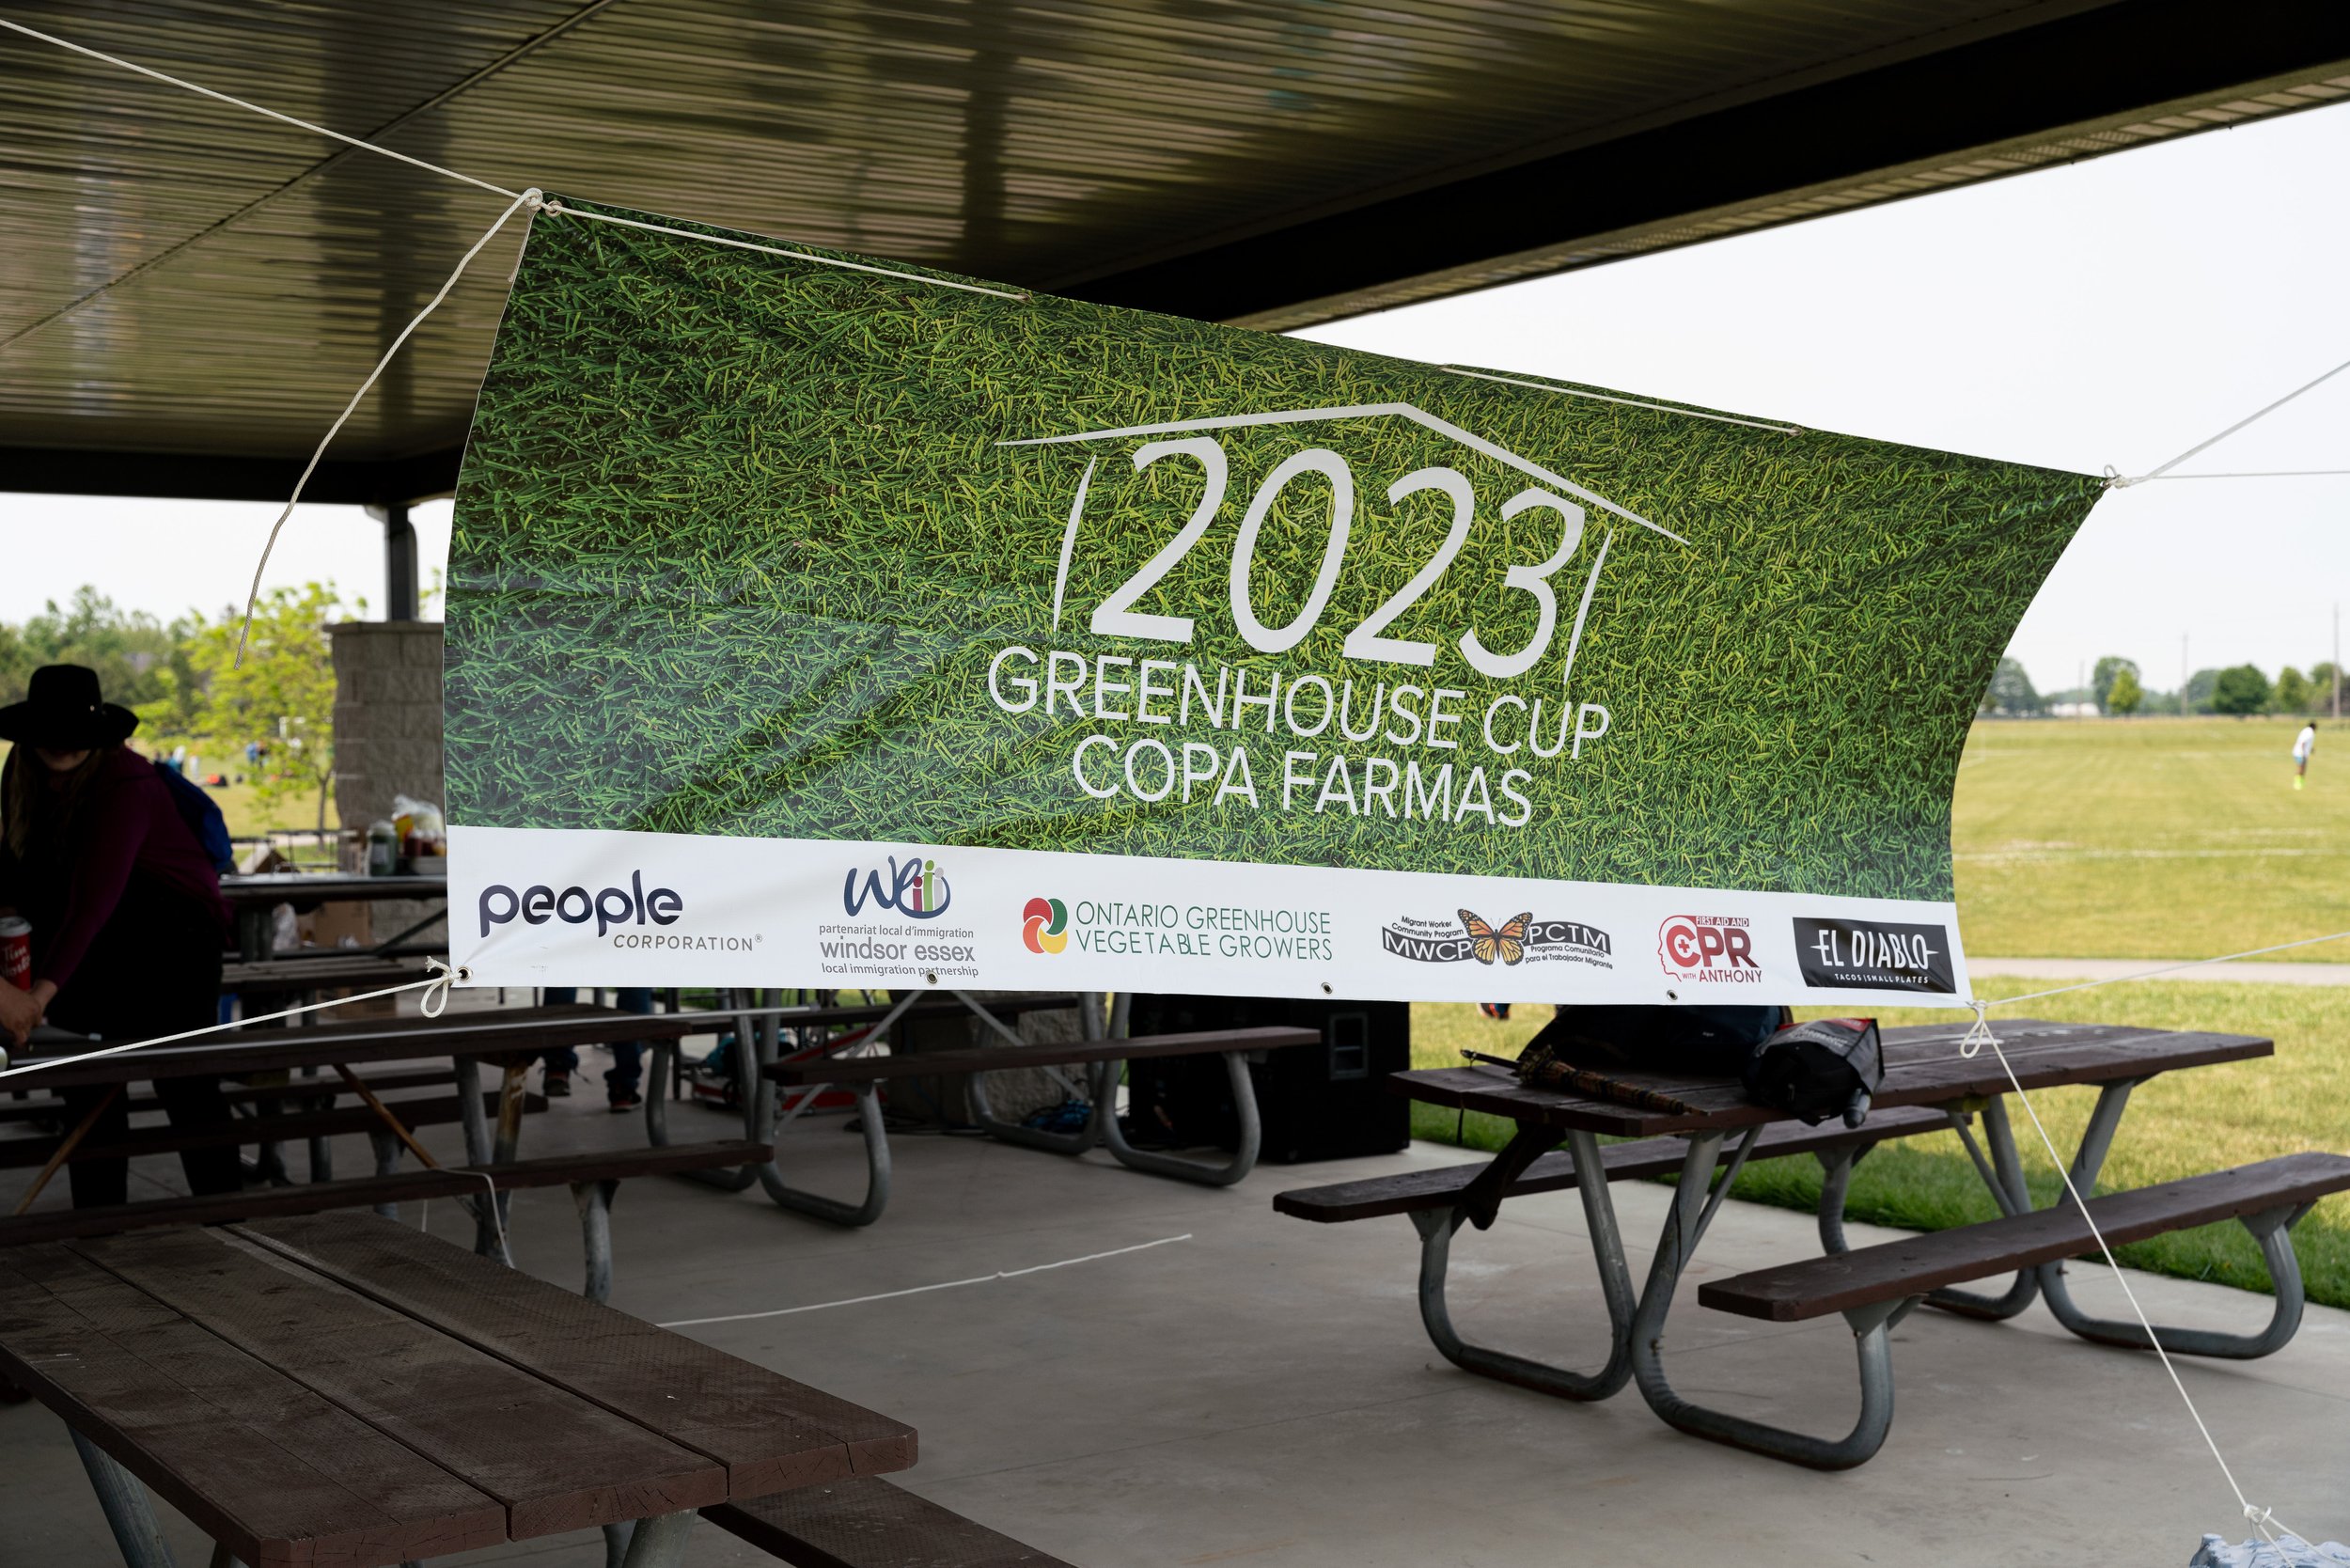 2023 Greenhouse Cup Soccer Festival in Leamington, Ontario